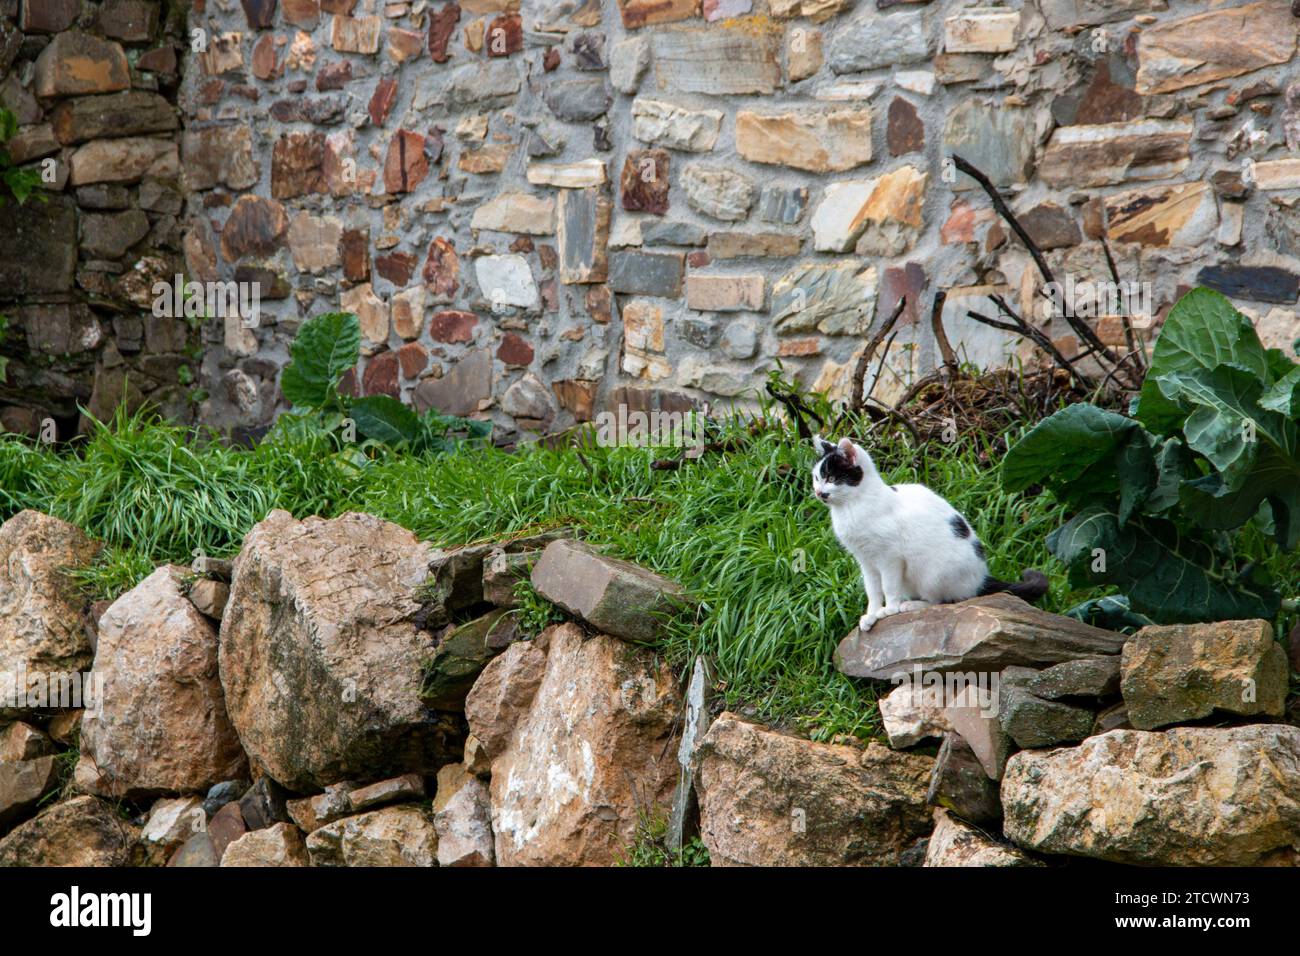 Domestic cats making their life in a rural environment Stock Photo